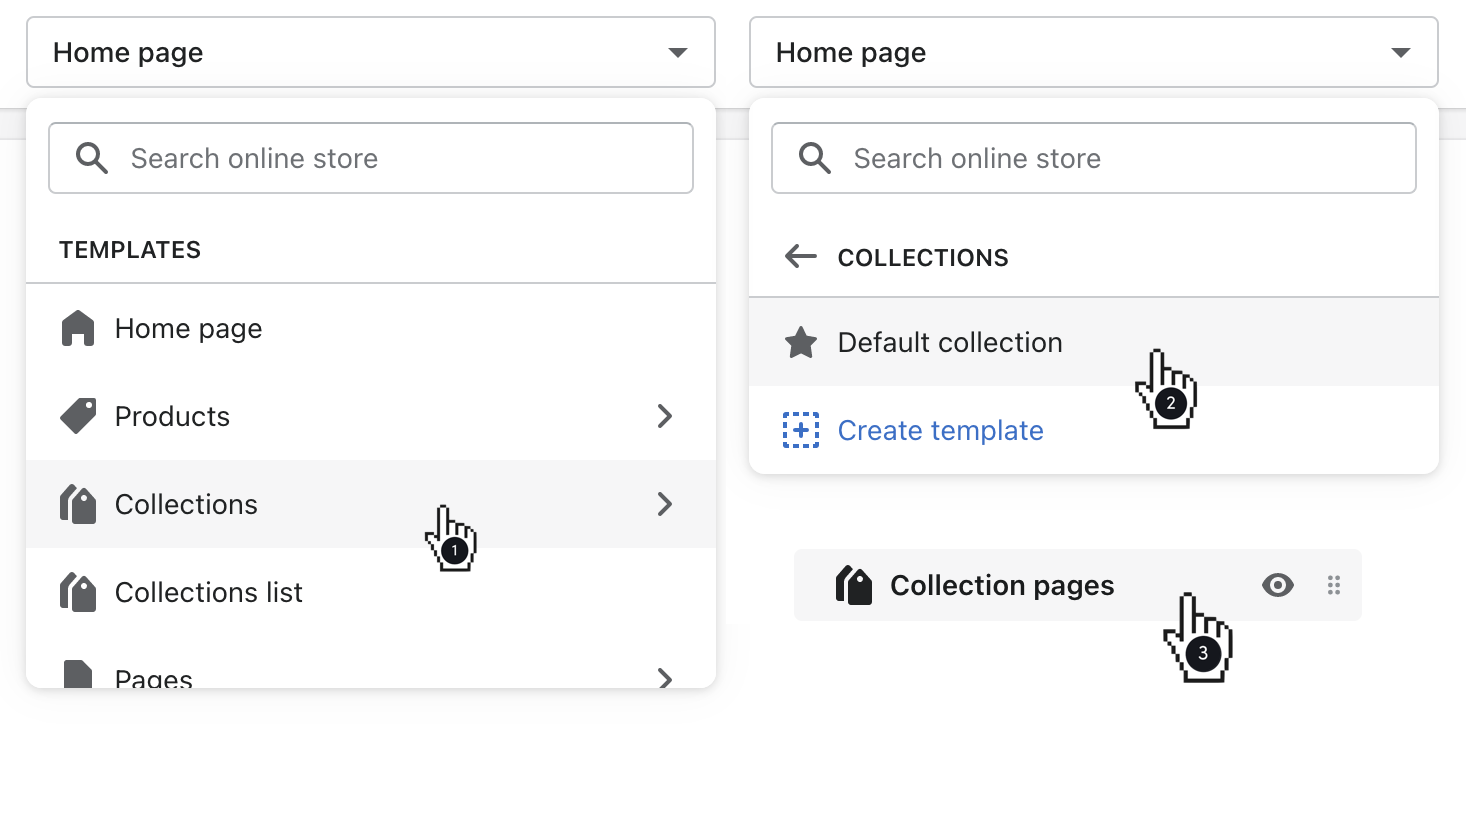 open_collections_then_default_collection_to_access_template_settings.png